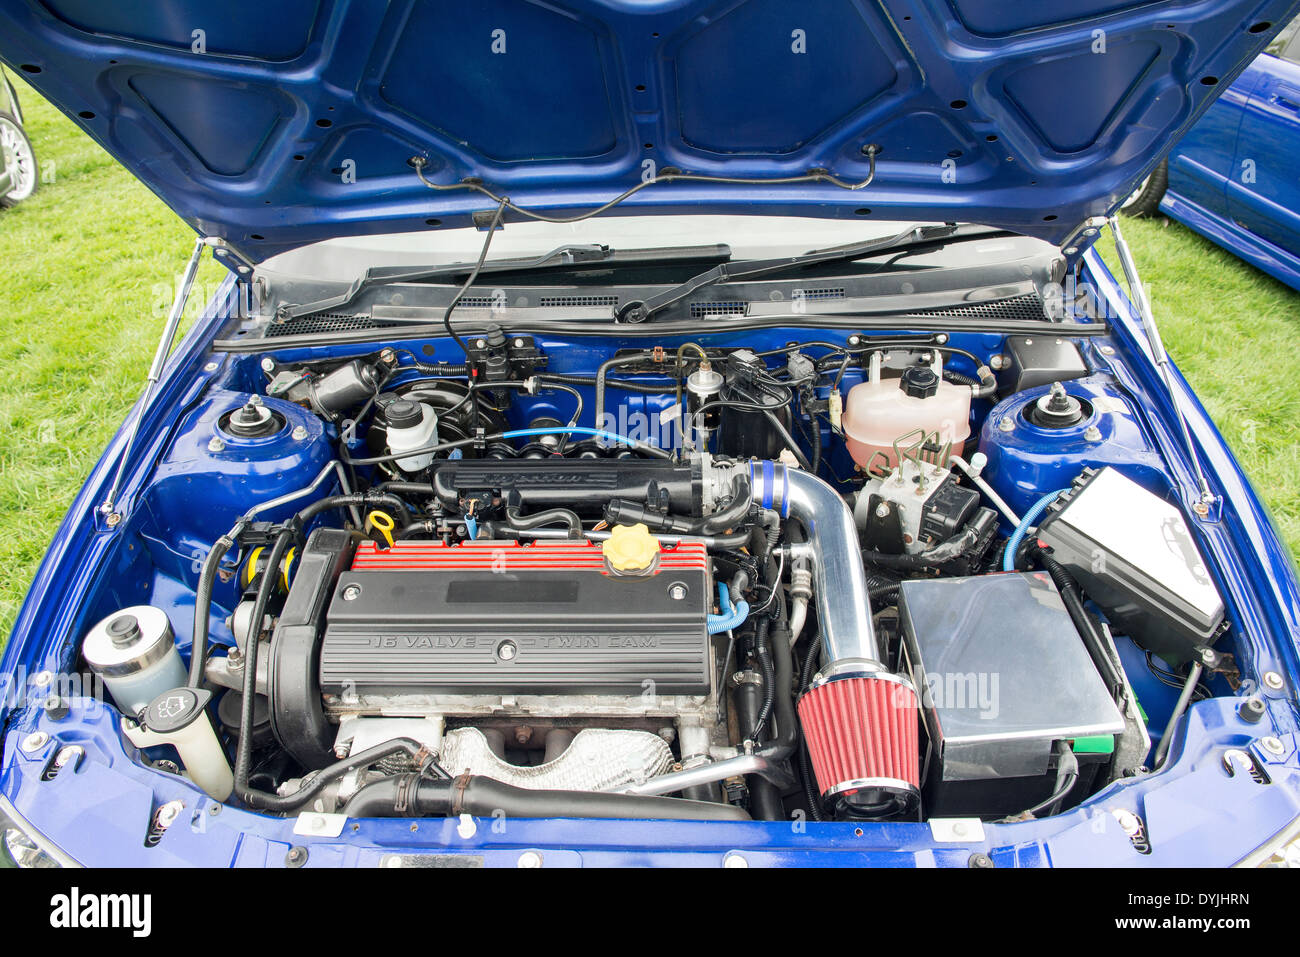 View of a tuned up car engine Stock Photo